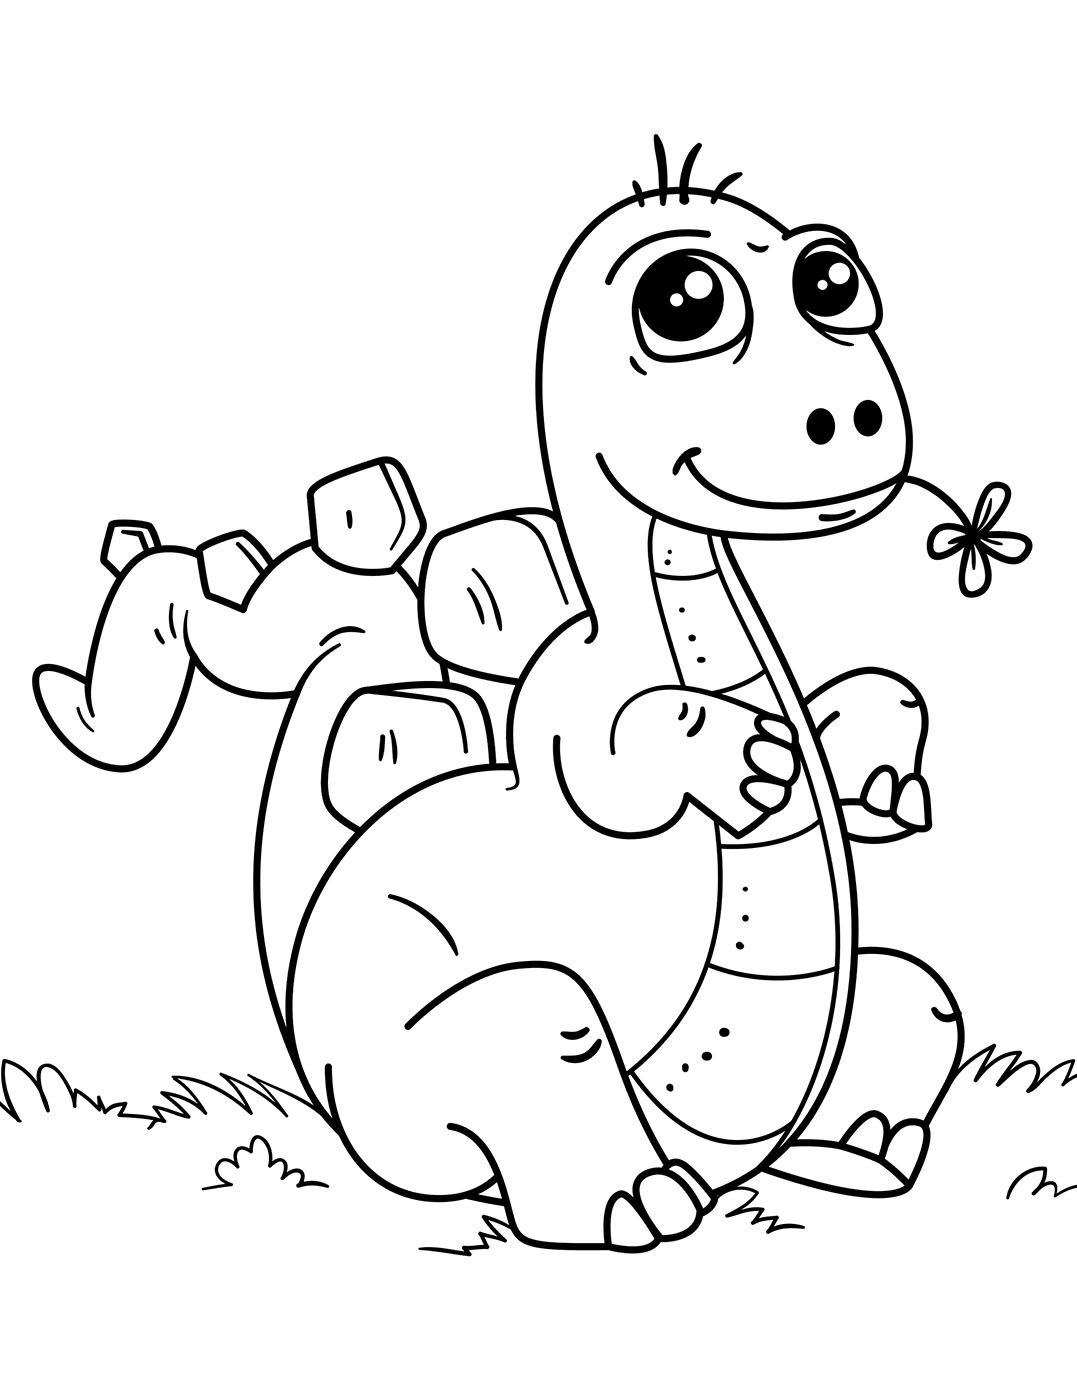 Coloring For Kids Dino Dinosaurs To Download For Free Brachiosaurus 